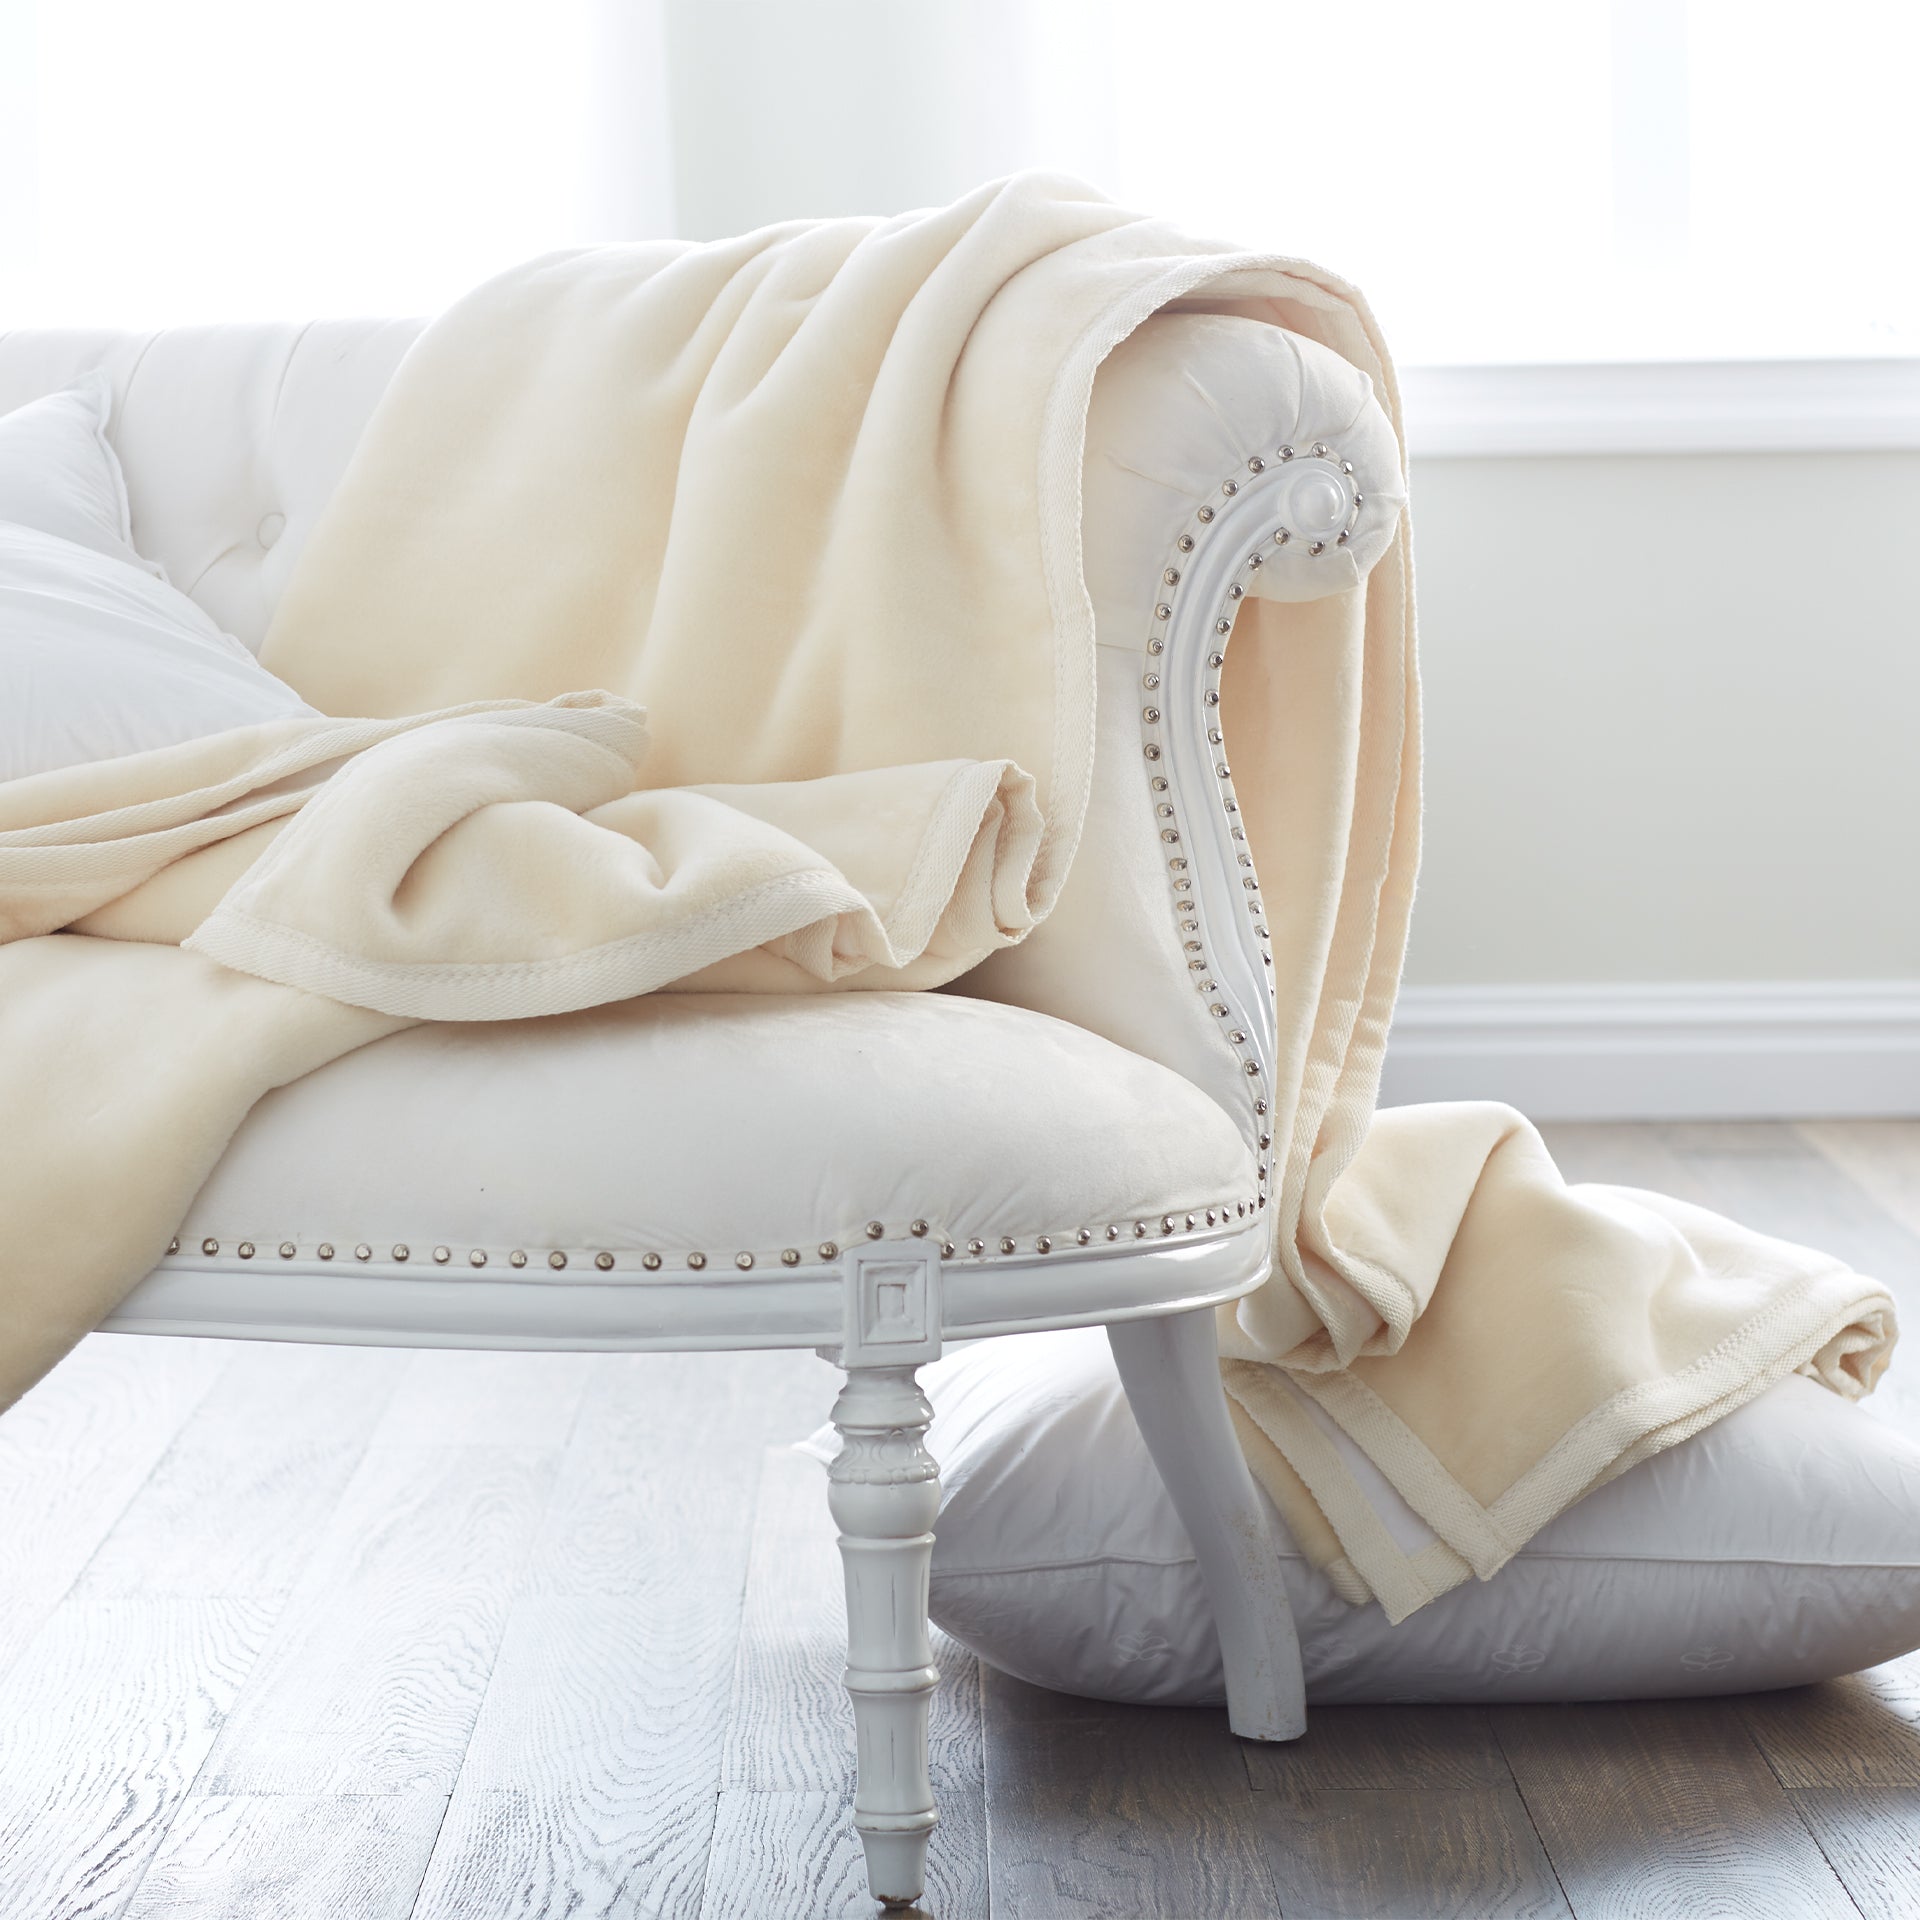 whether drapped across a sofa or folded at the foot of a bed, this plush cotton blanket adds the perfect touch of warmth, 